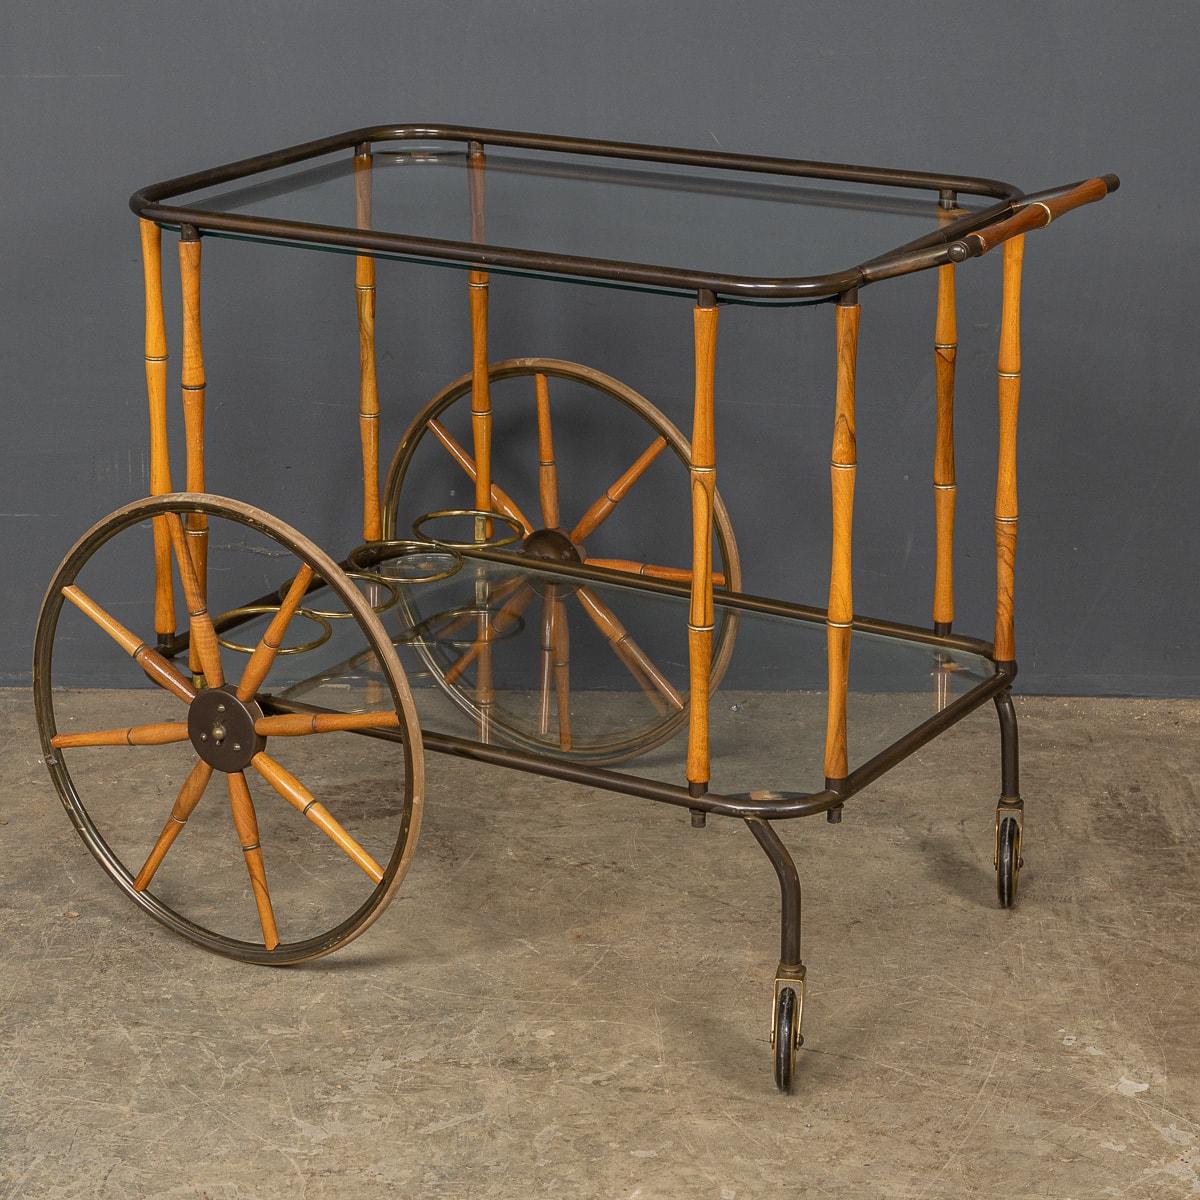 A rare 20th century bar cart attributed to Maison Jansen, this practical piece has two glass trays, the lower tray with original bottle holders, two large wheels and two small.

CONDITION
In Great Condition - wear consistent with age, please